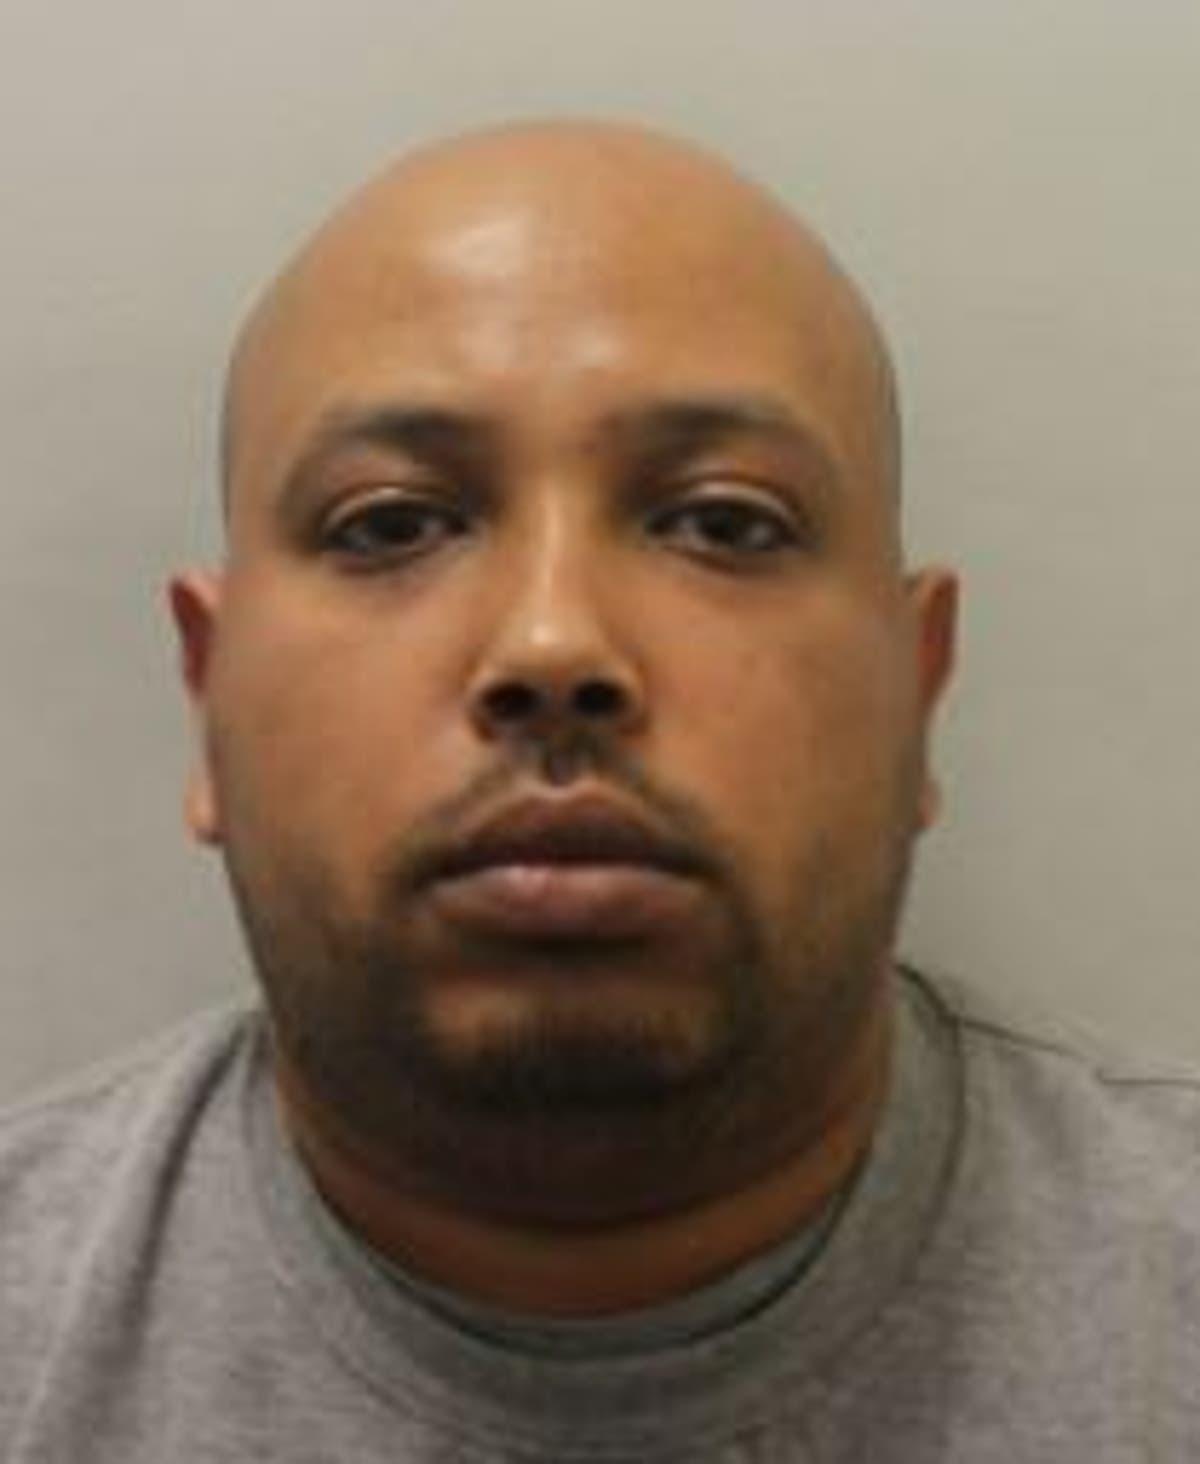 Man jailed for sexually assaulting neighbour while she was sleeping